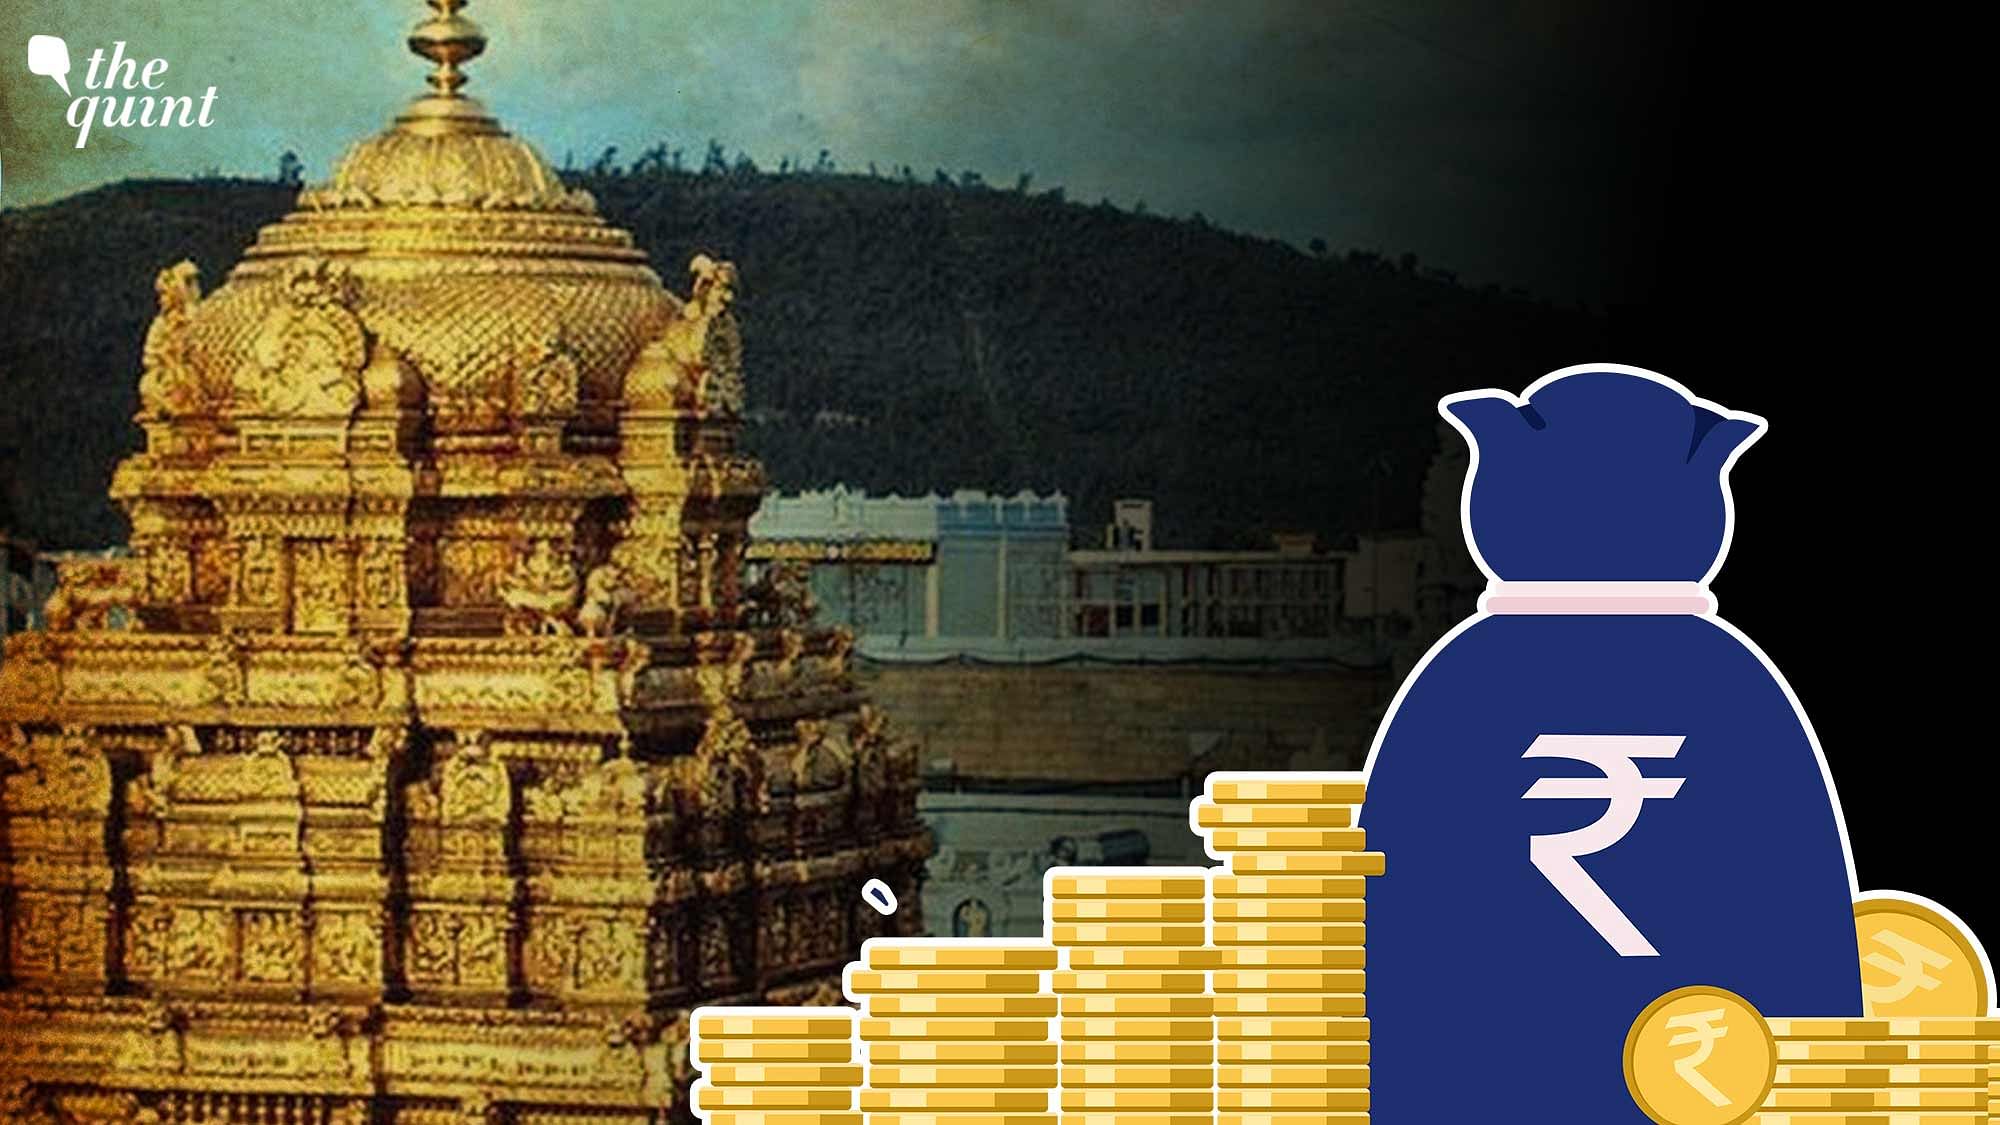 <div class="paragraphs"><p>The TTD's assets include 10.25 tonnes of gold deposits in banks, 2.5 tonnes of gold jewellery, about&nbsp;Rs 16,000 crore of deposits in banks, and 960 properties in India.&nbsp;</p></div>